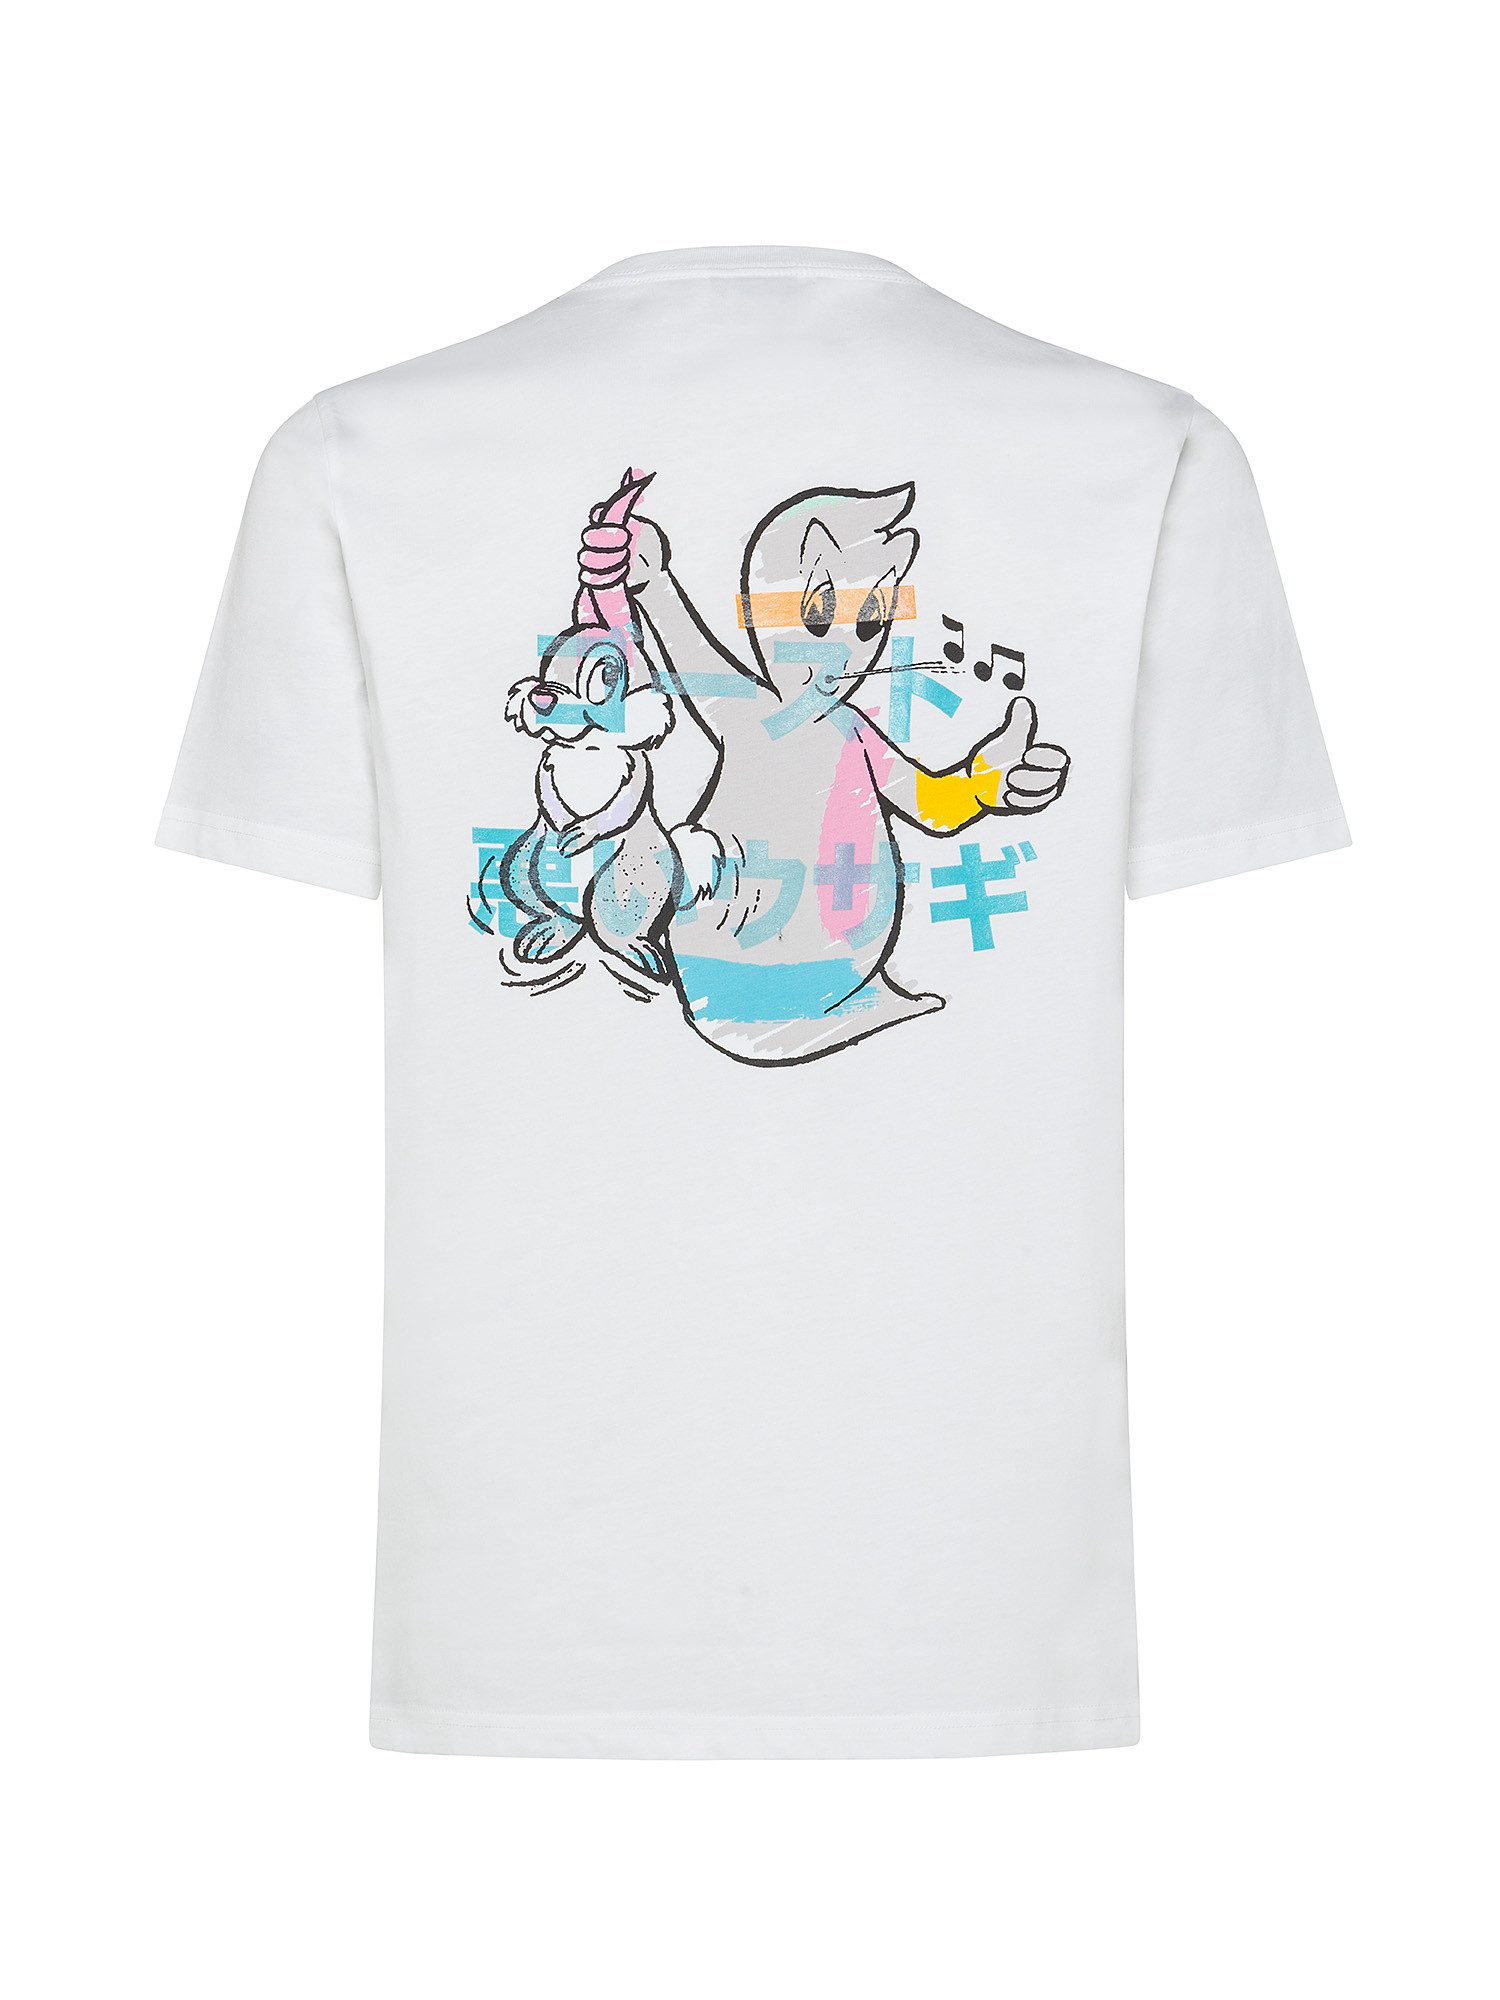 Paul Smith Ghost Print Cotton T-Shirt, White, large image number 1